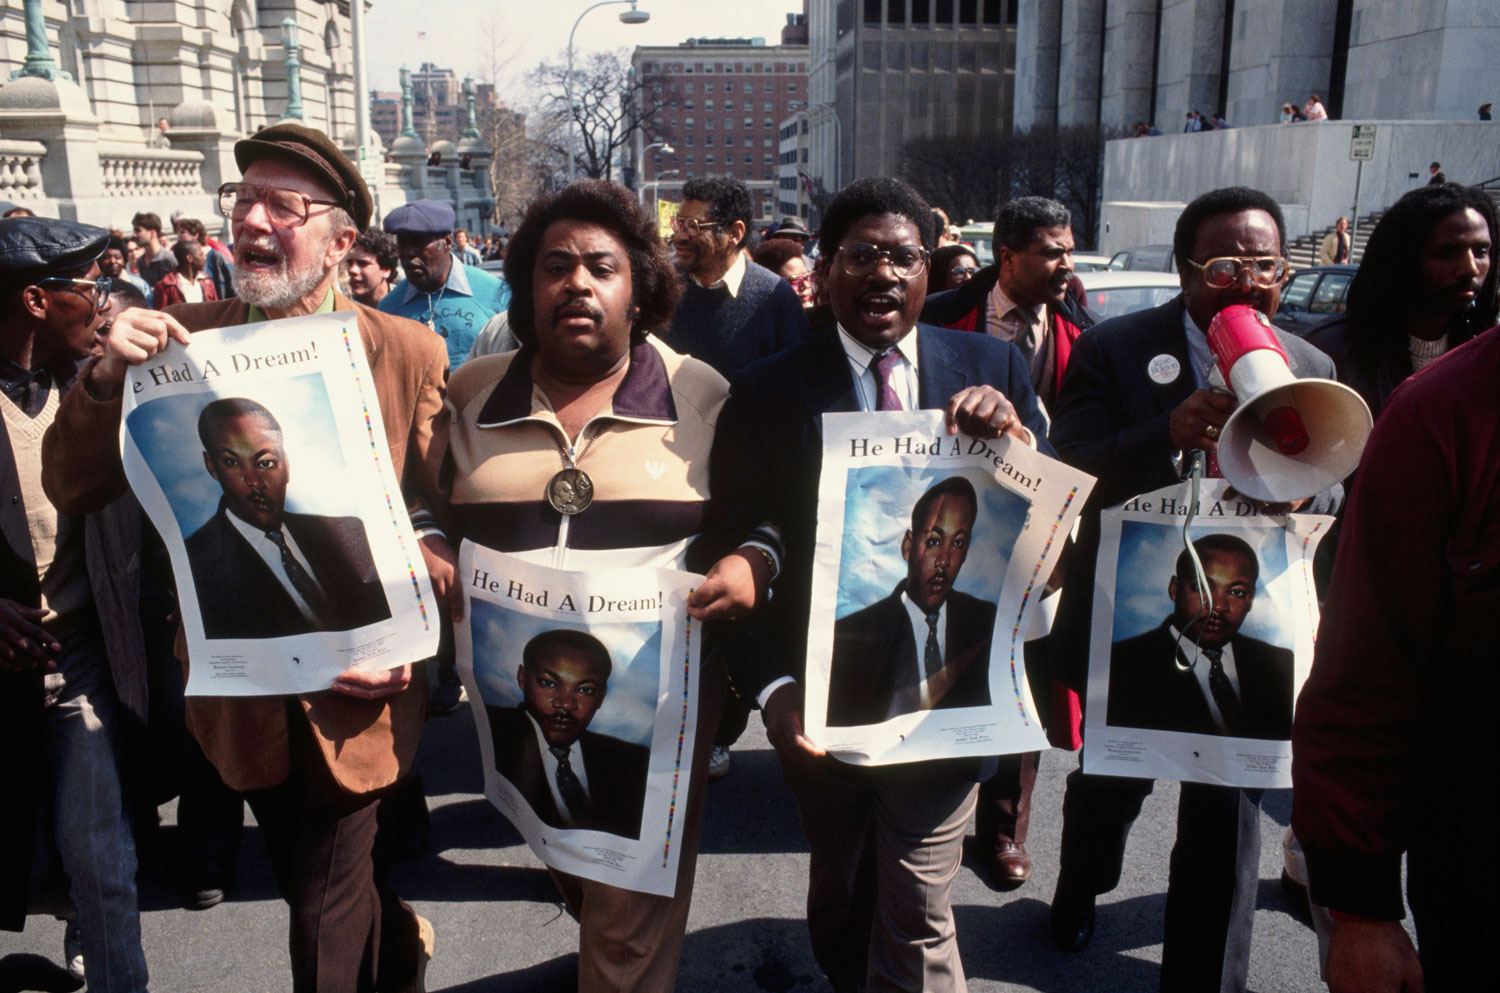 From left: Pete Seeger, Al Sharpton and other civil rights activists lead a demonstration in protest of the Tawana Brawley incident, in Albany, N.Y., in March 1988.